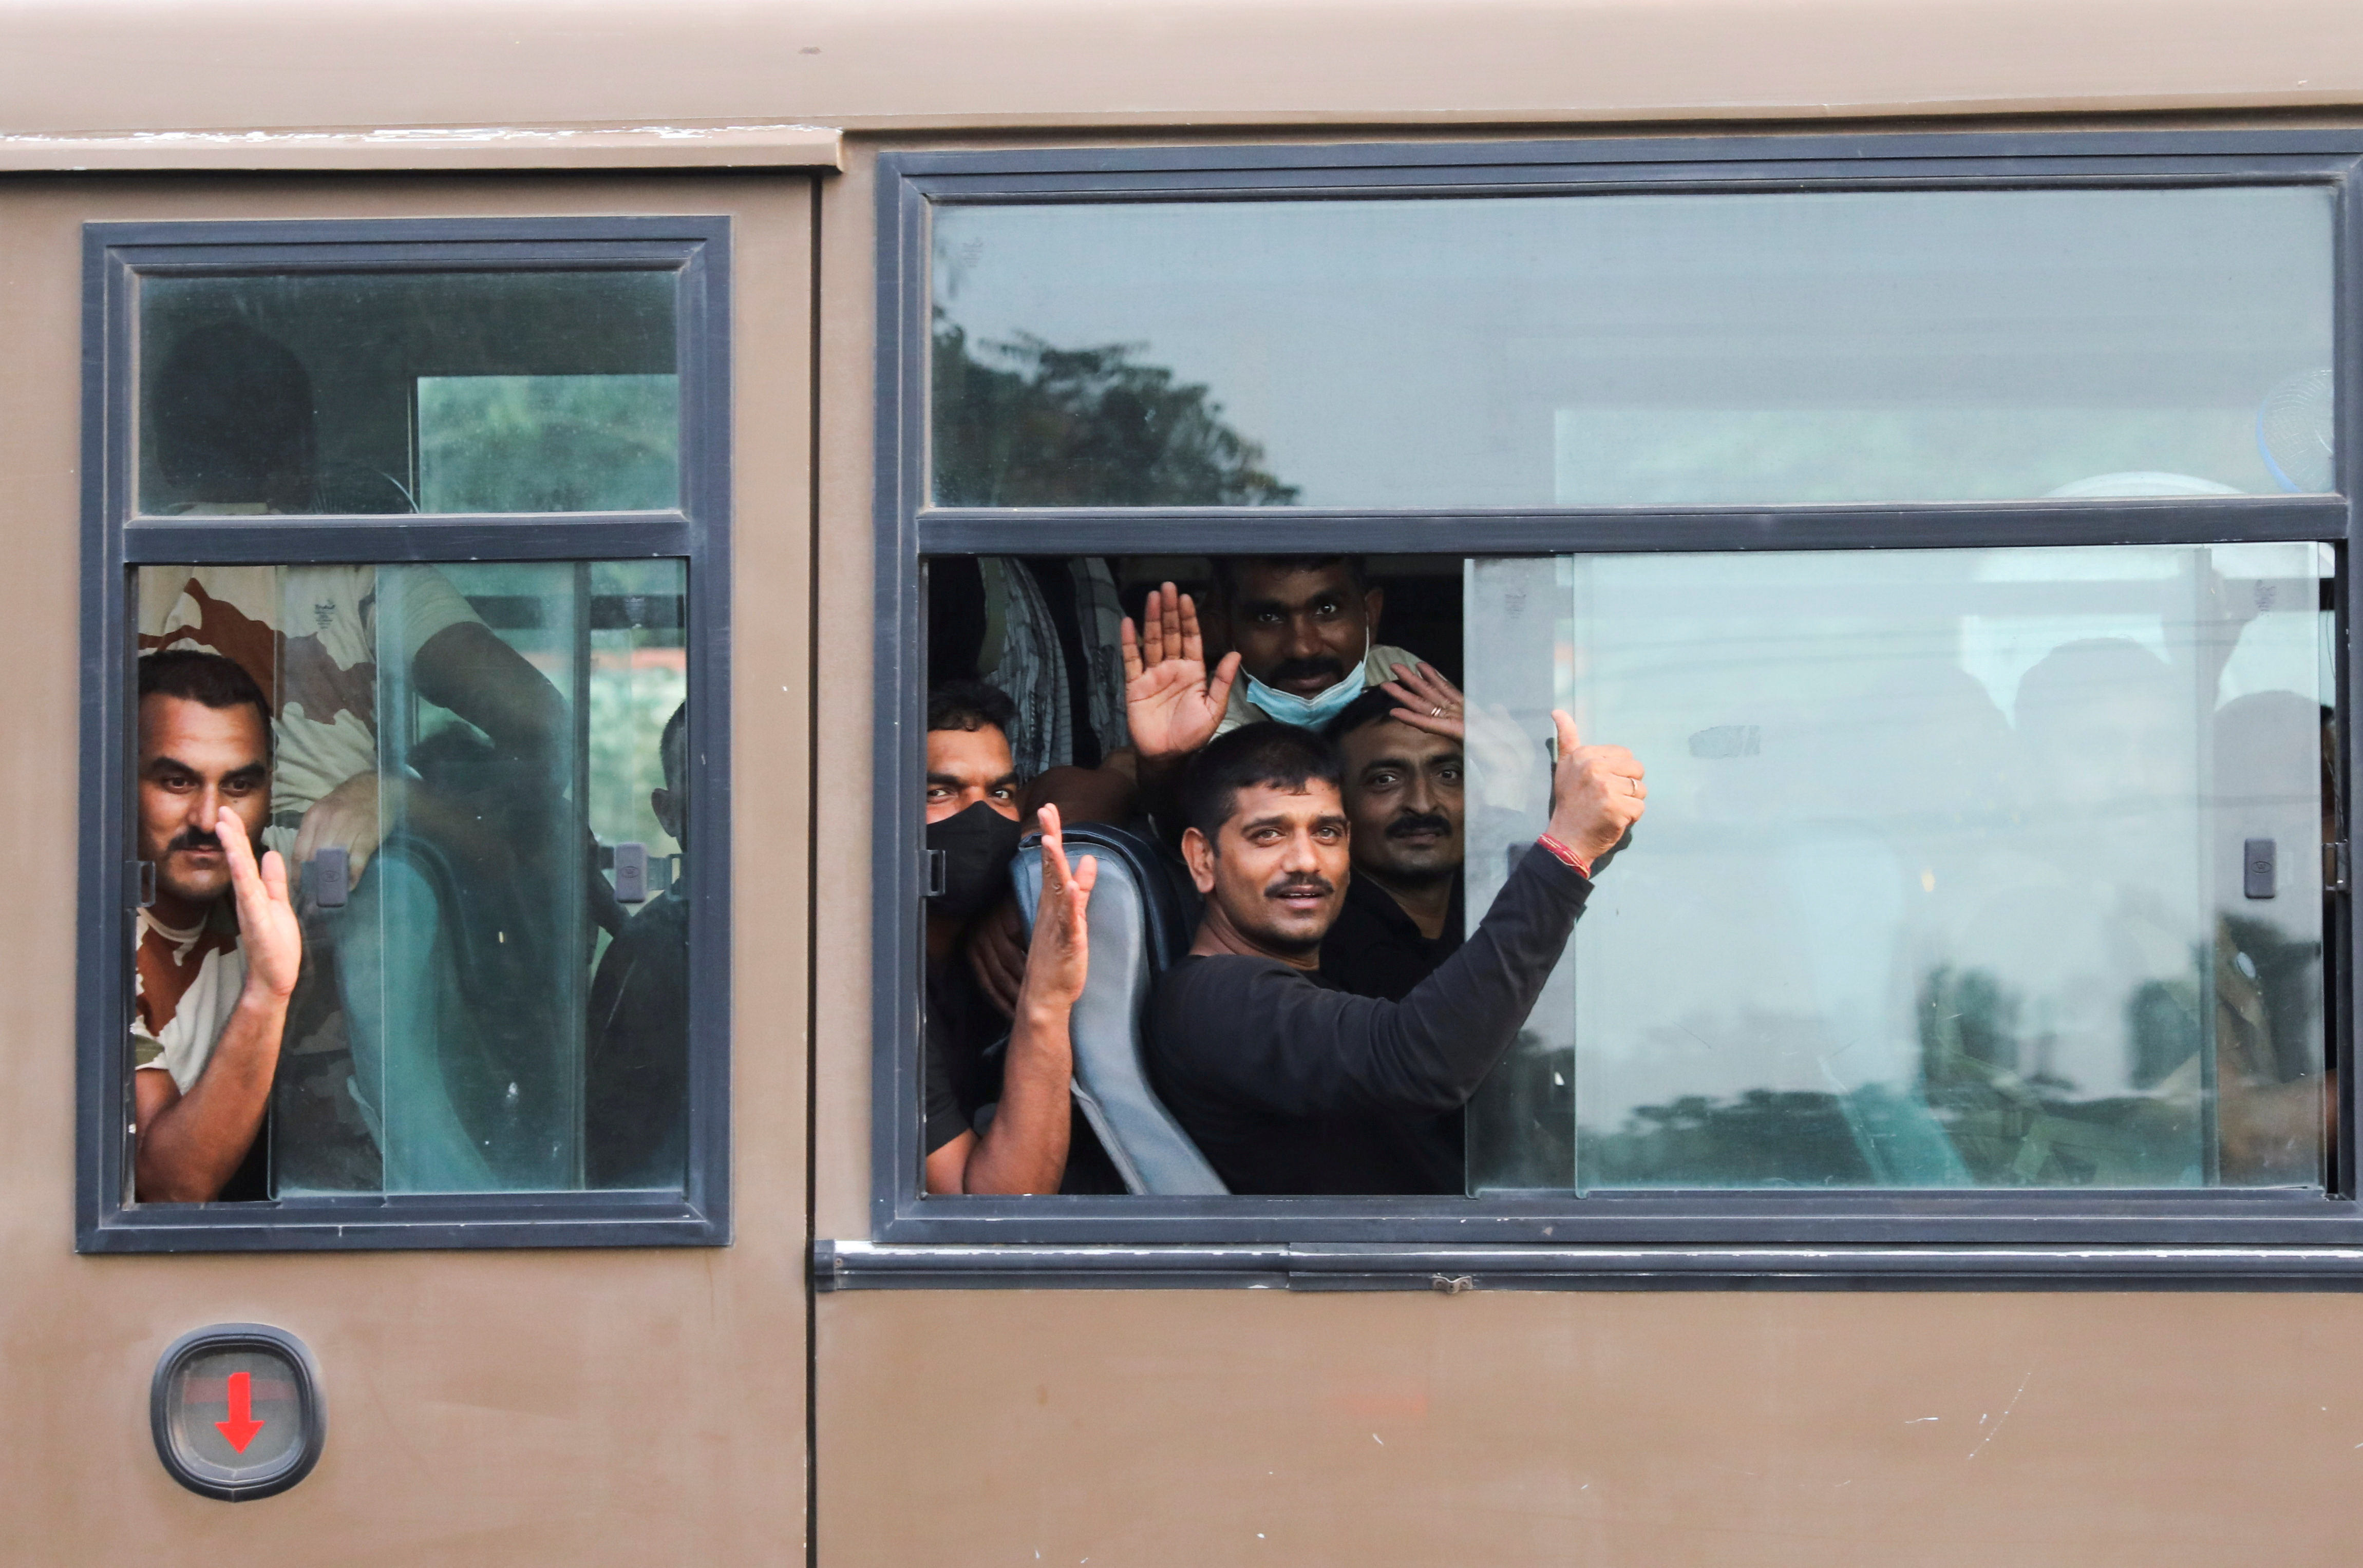 People who were evacuated from Kabul wave from inside the Indo-Tibetan Border Police (ITBP) bus as it leaves the Hindon Air Force Station in Ghaziabad